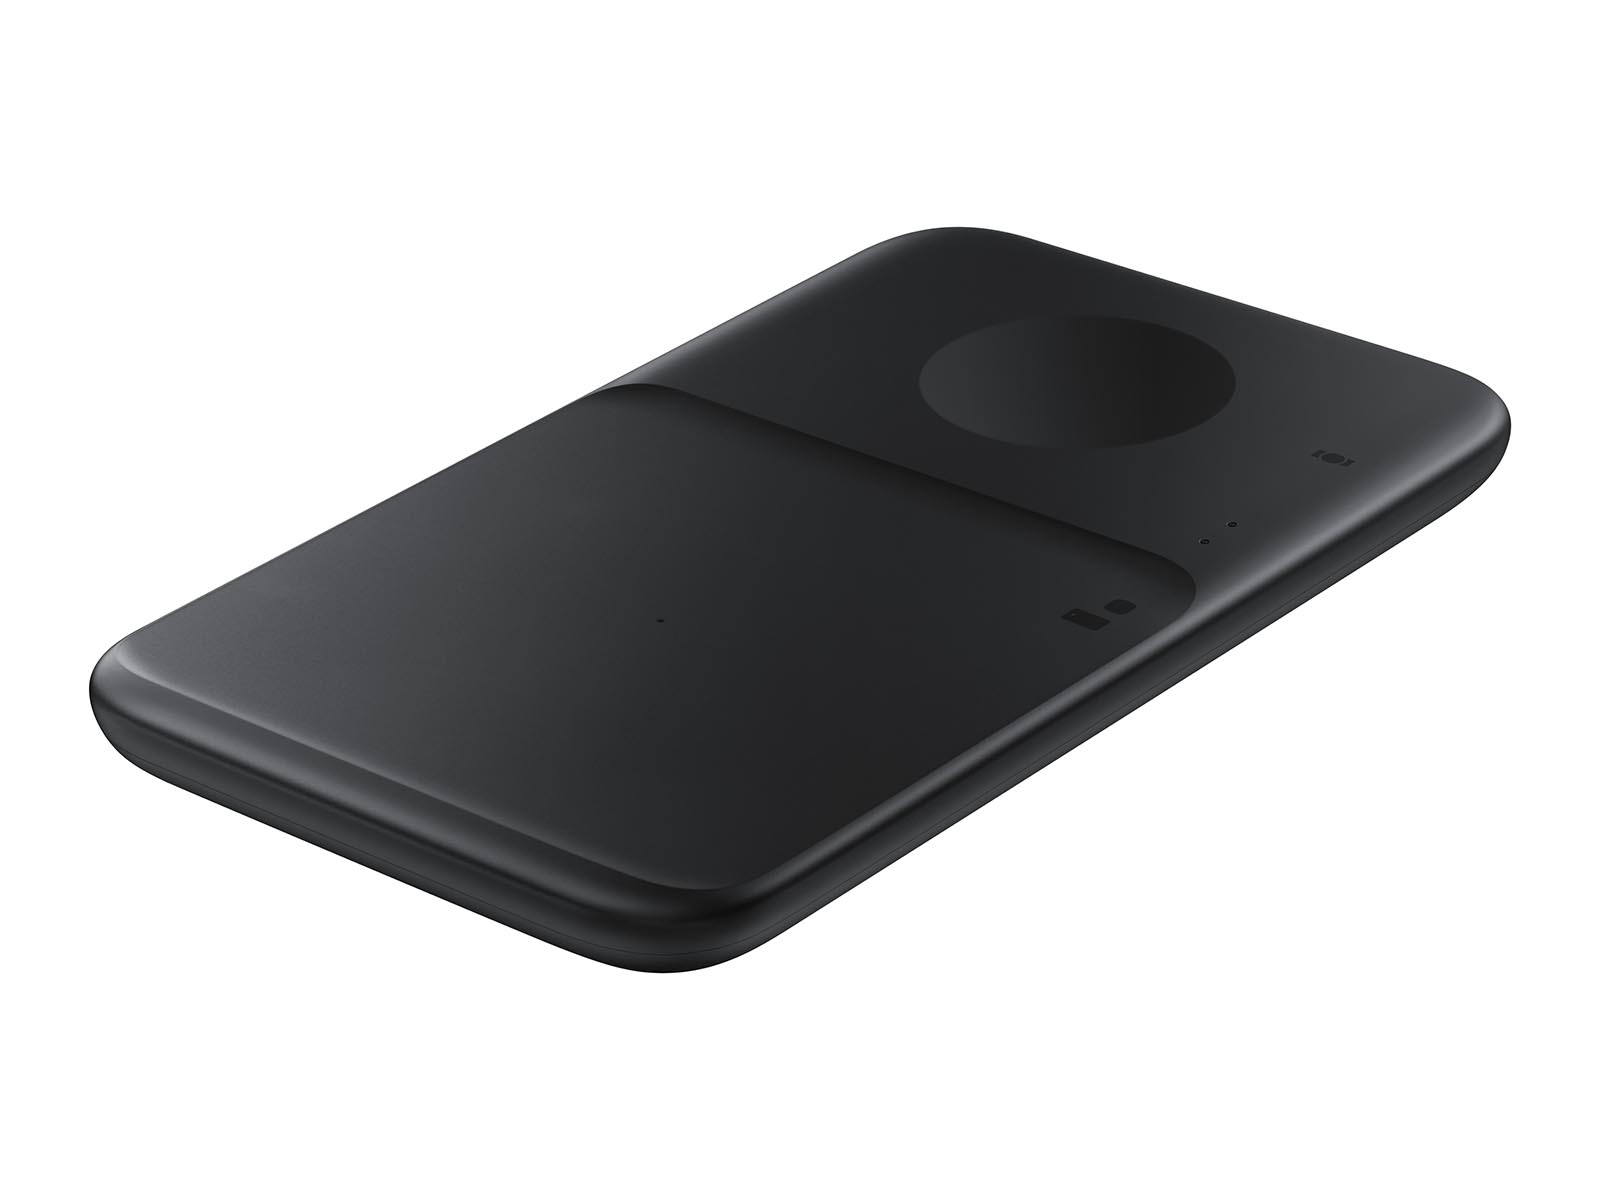 Wireless Charger Duo, Black Mobile Accessories - EP-P4300TBEGUS | Samsung US